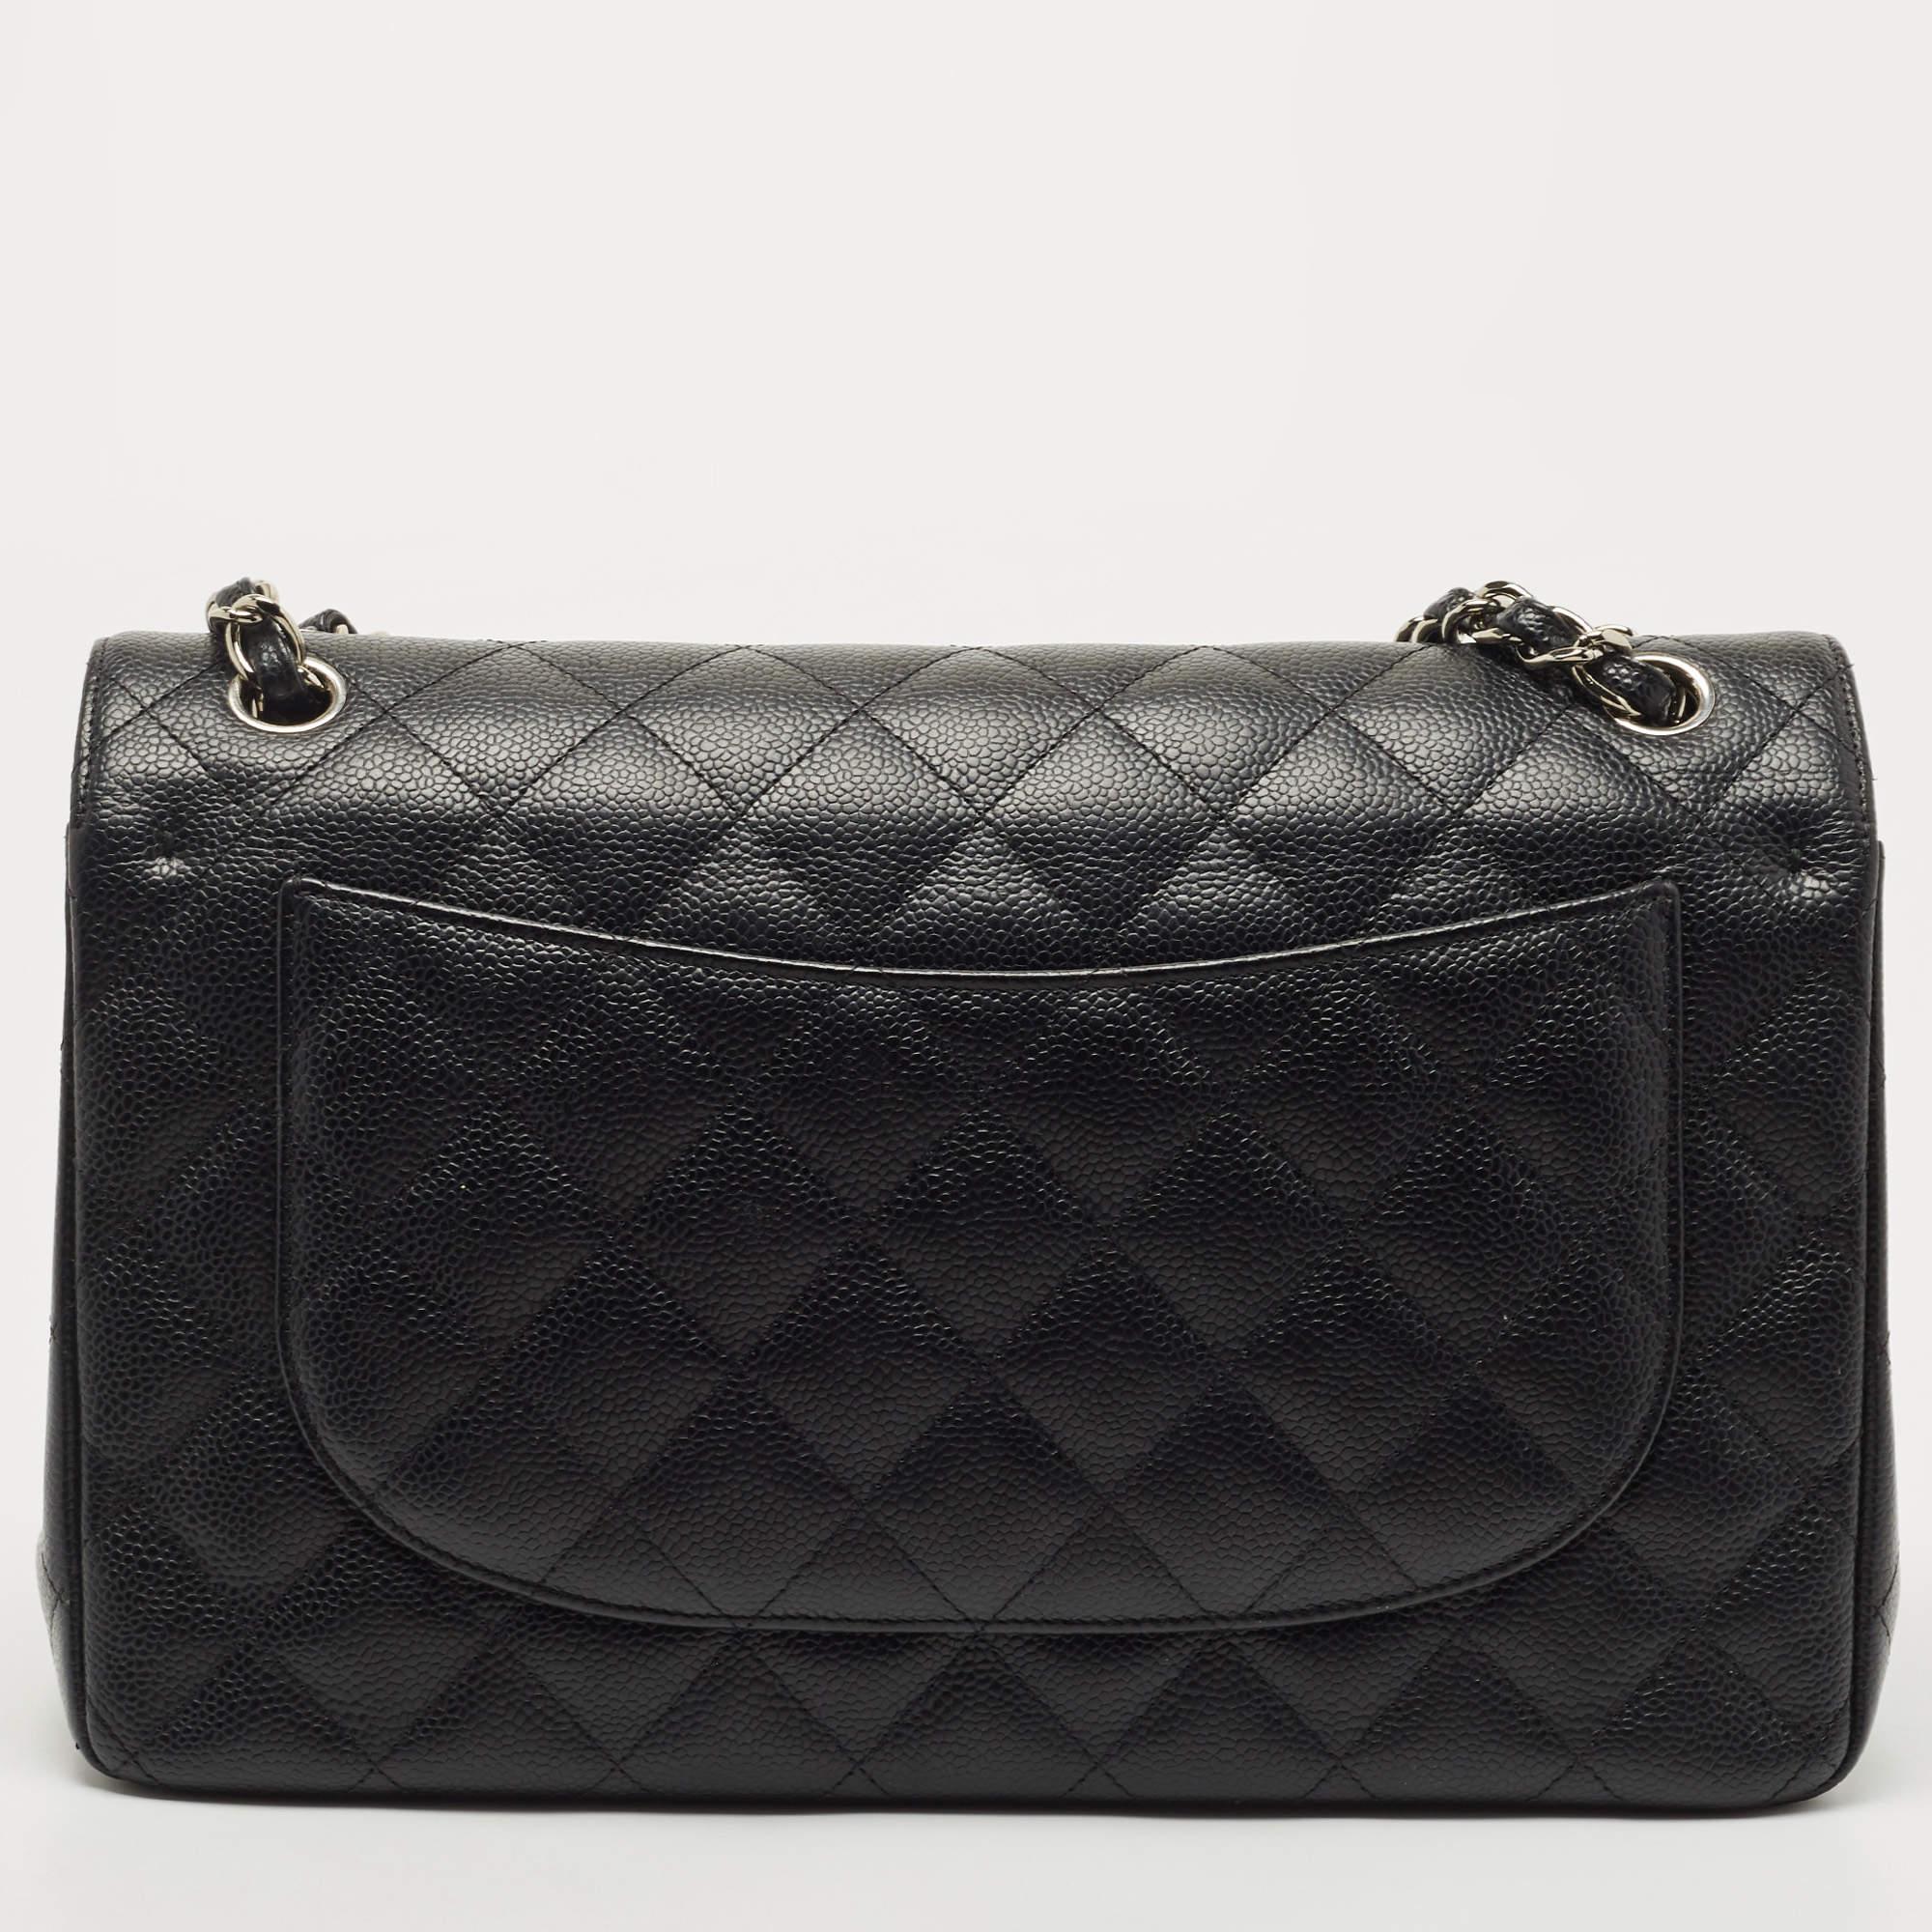 Chanel's luxurious Classic Flap bag is a must-have in a well-curated wardrobe! This stunning bag has a masterfully-crafted leather exterior with silver-tone hardware and the iconic CC logo on the front. This Classic Double Flap is complete with a